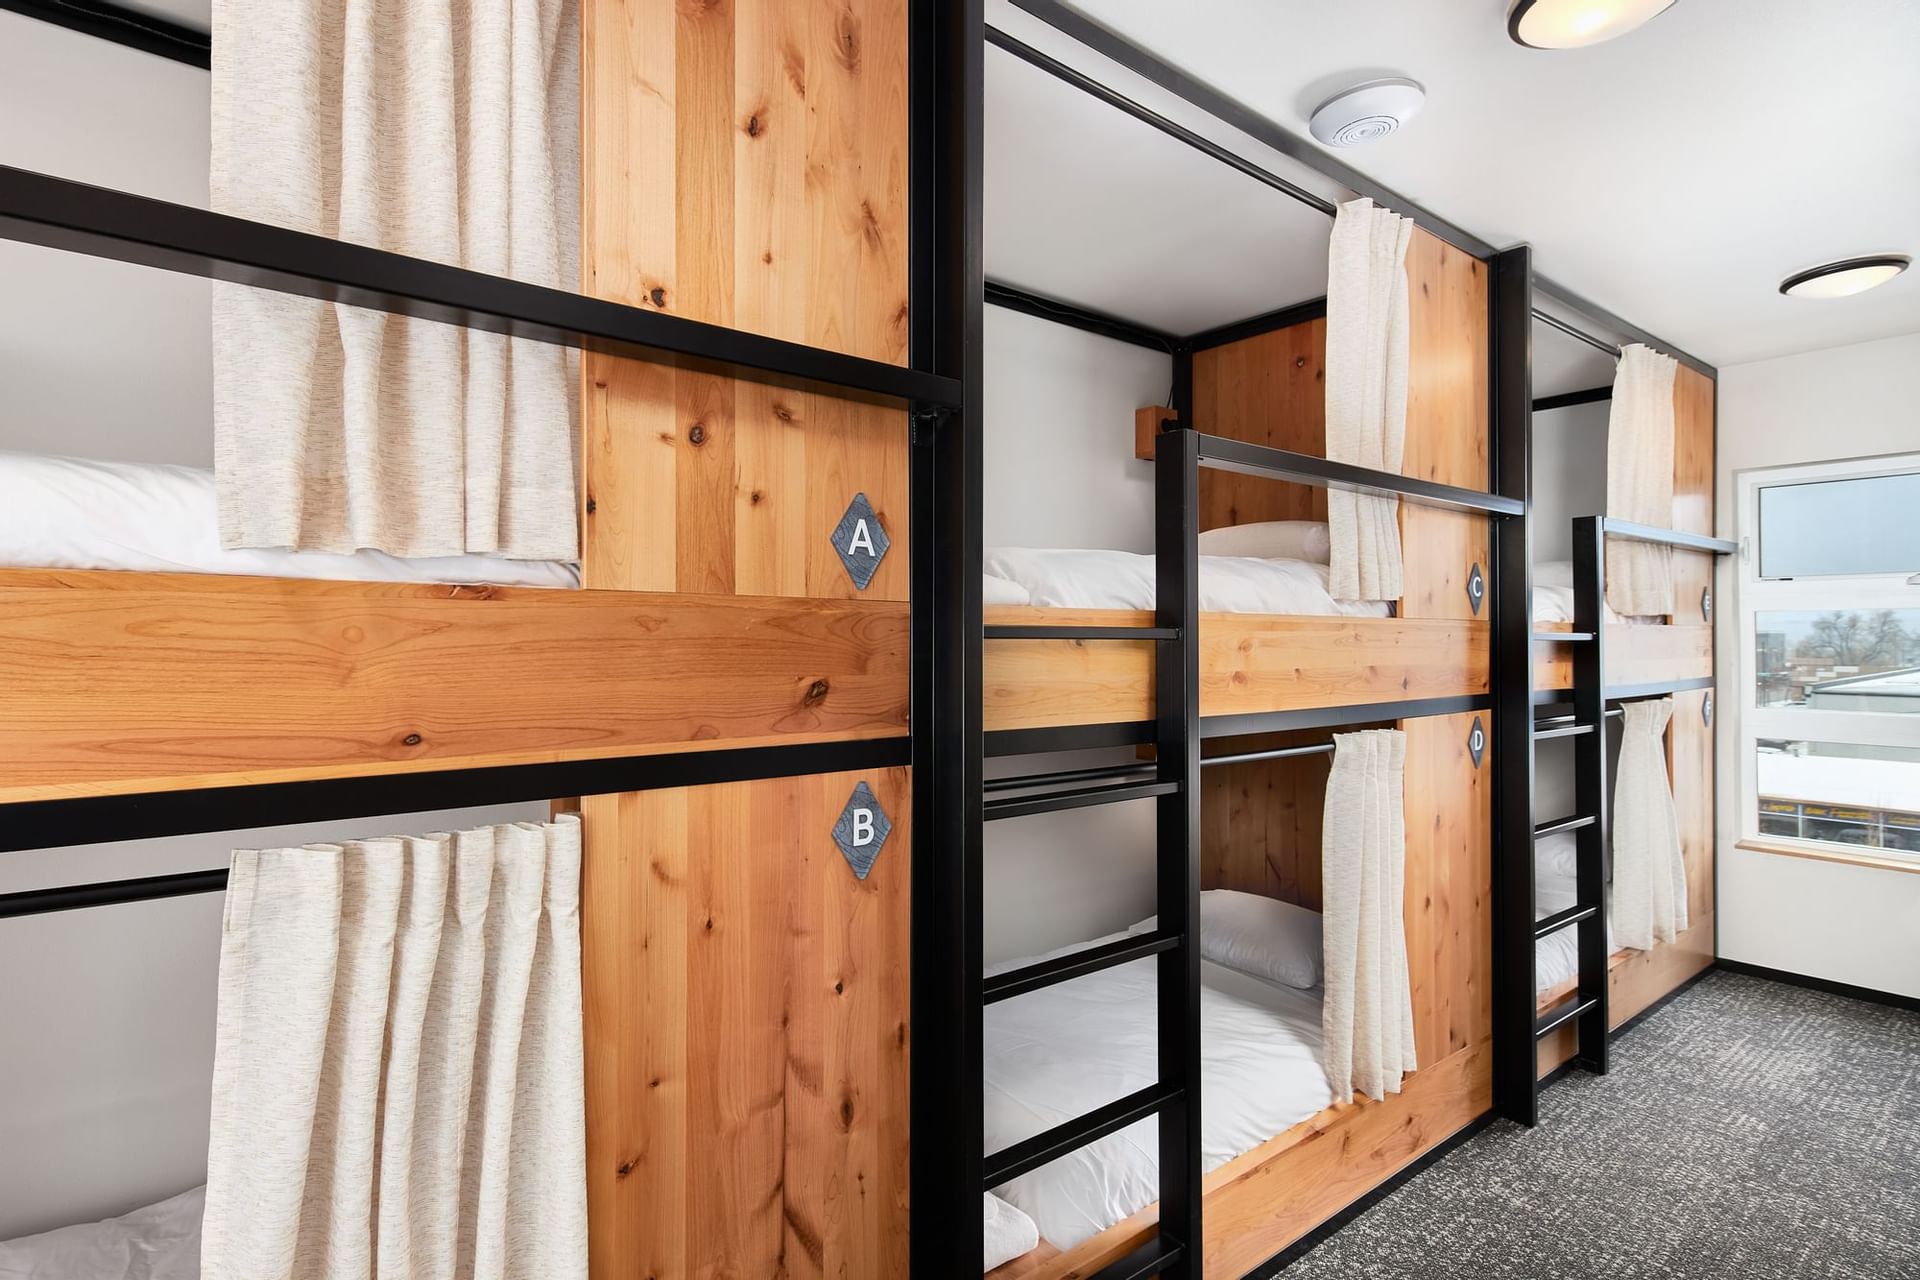 The Bunkbeds in the Group Bunkroom at Kinship Landing